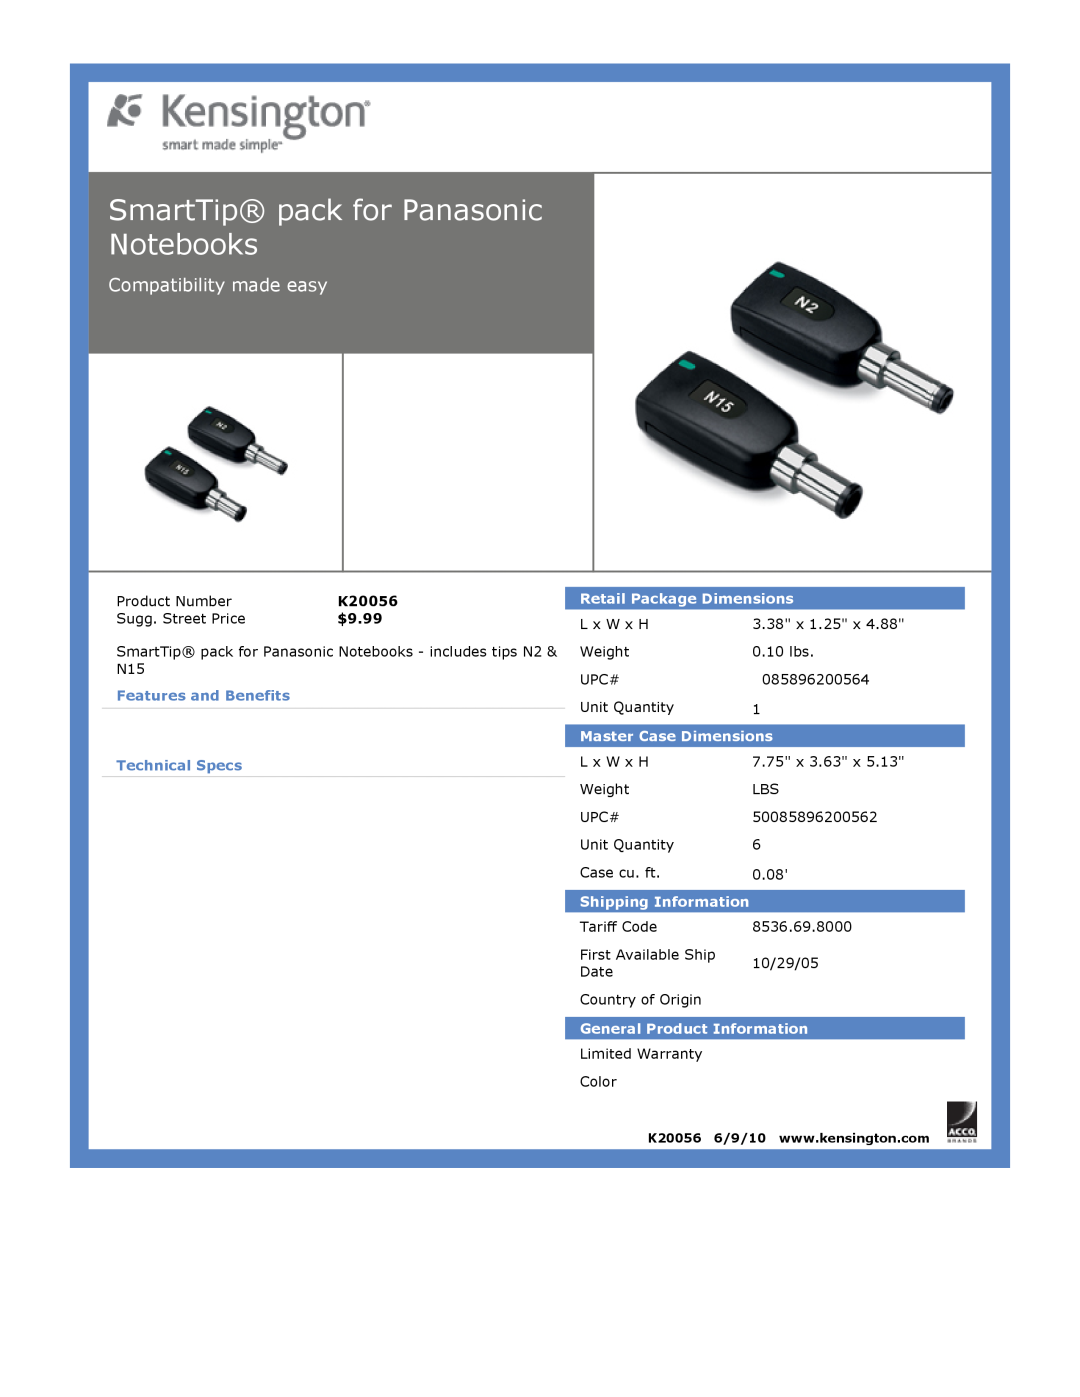 Kensington EU64325 SmartTip pack for Panasonic Notebooks, Compatibility made easy, $9.99, Retail Package Dimensions 